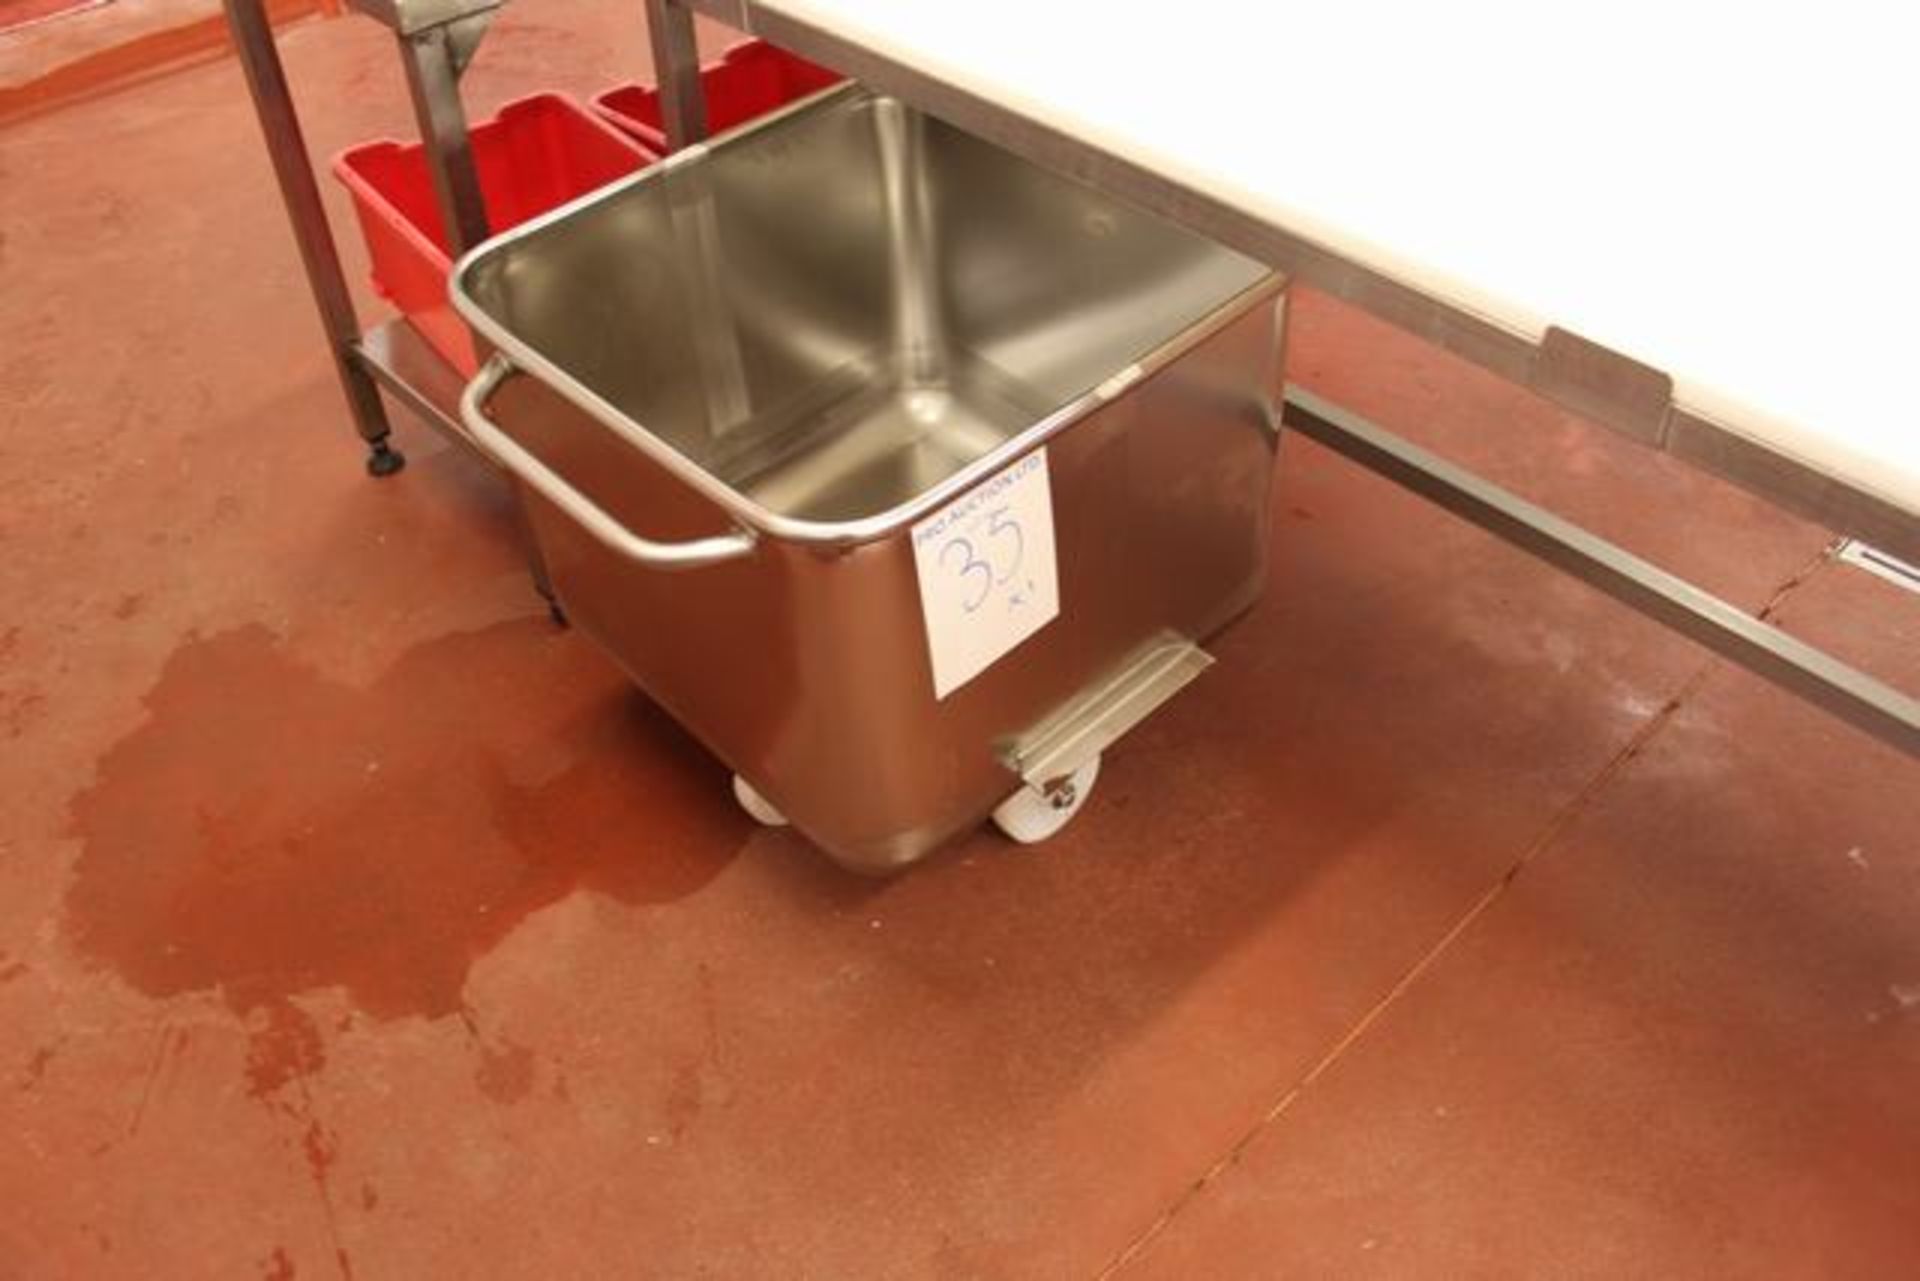 Stainless Steel Tote Eurobin highest quality European manufactured 200 litre capacity Lift out